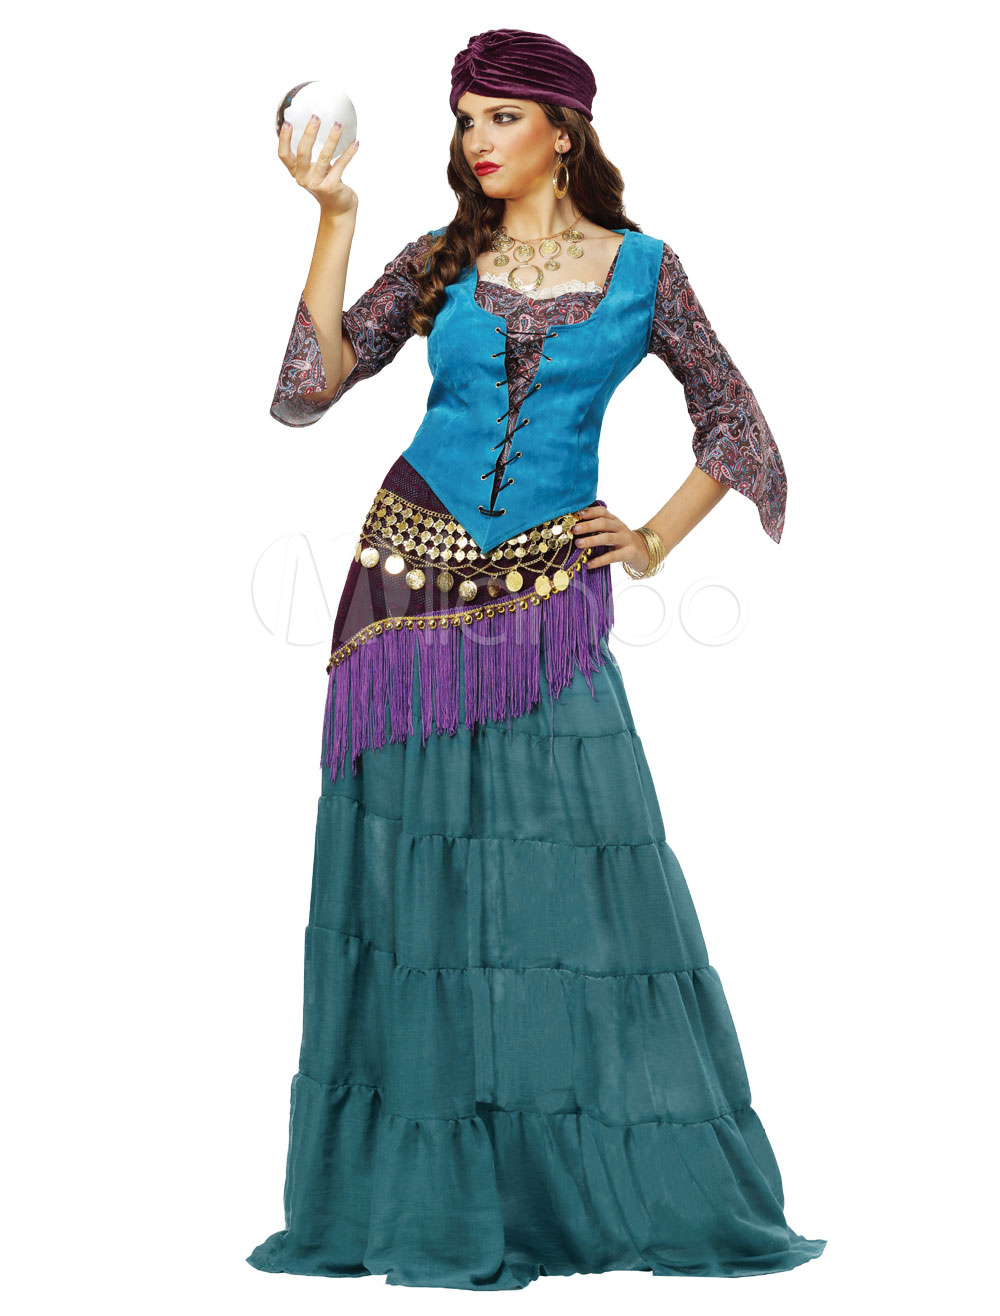 Haloween Gypsy Costume Outfits Women Atrovirens 5 Pieces